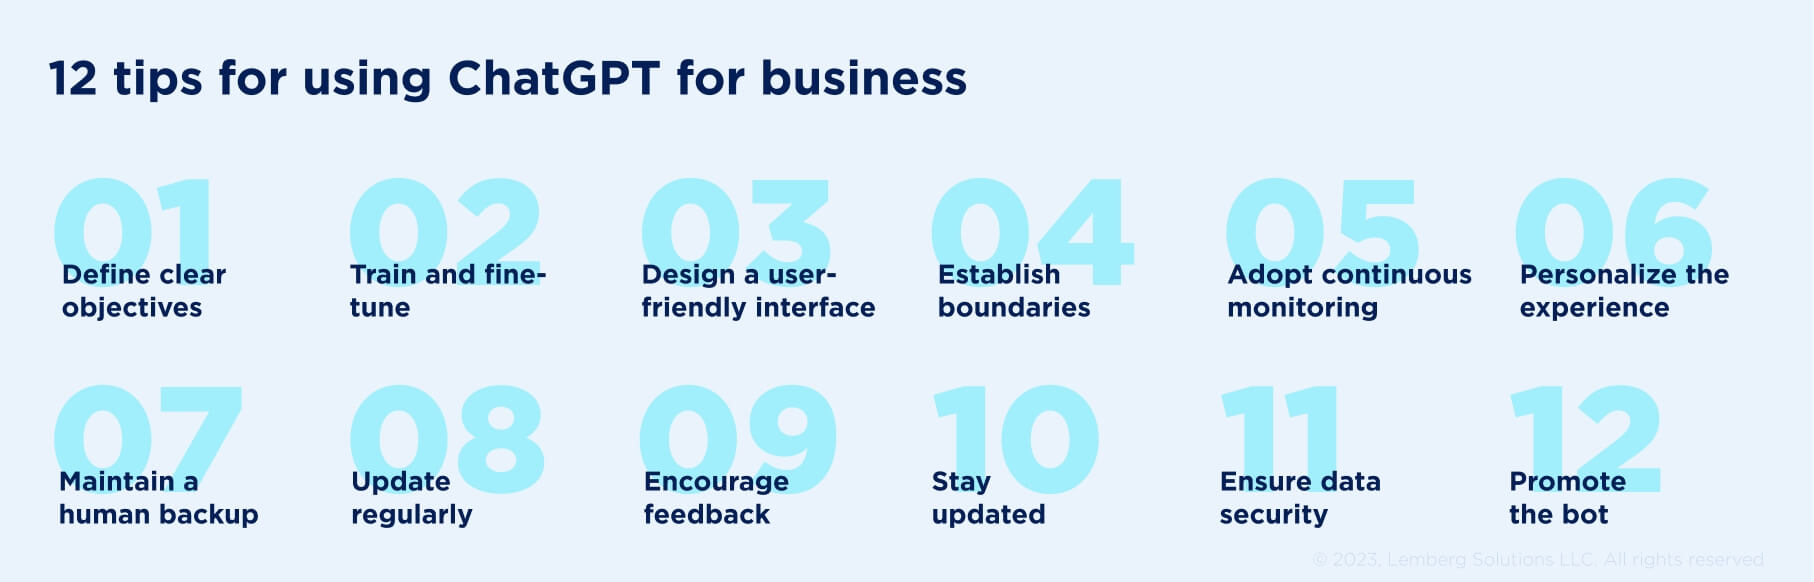 How to Use ChatGPT for Your Business? - Lemberg Solutions - 12 tips for using ChatGPT for business